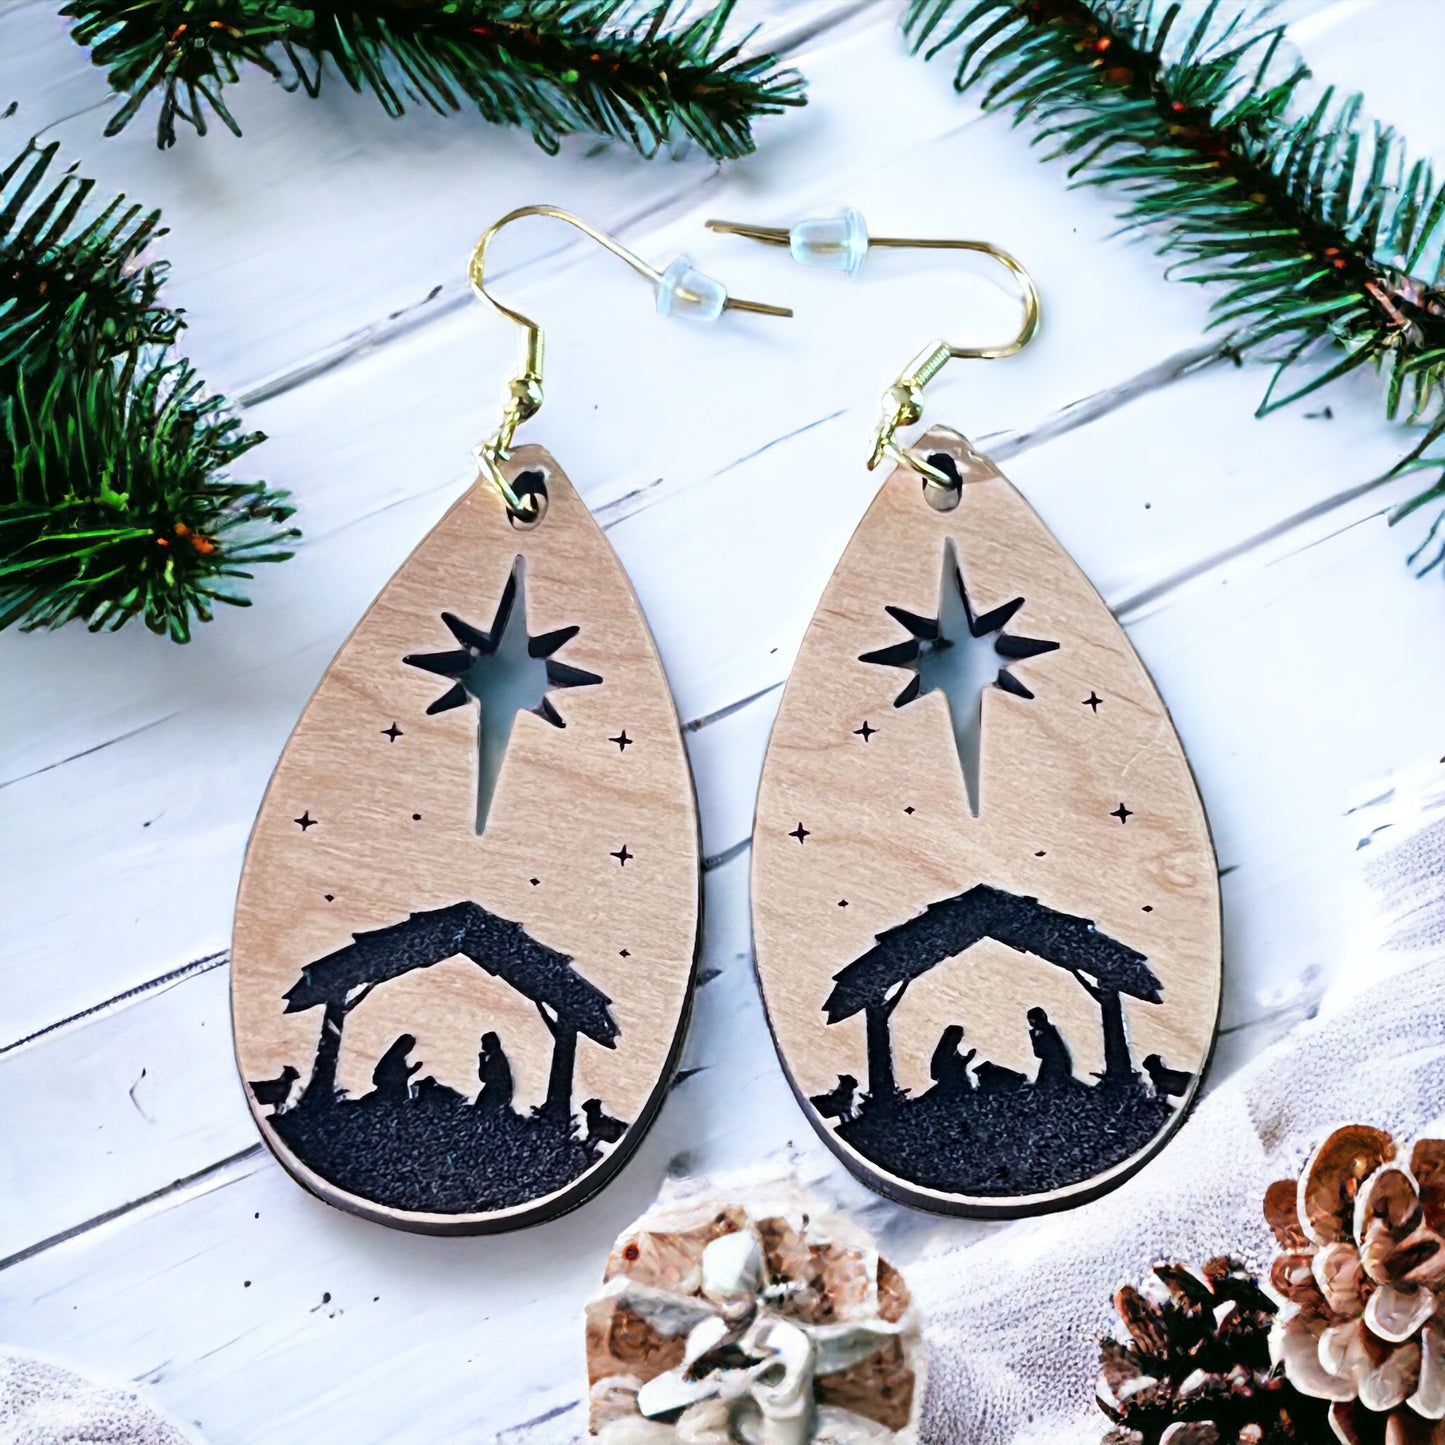 Nativity Earrings, Christmas Jesus Dangle Earrings, Cute Holiday Earrings, Wood Christian Earrings, Country Xmas Jewelry, Rustic Nature Gift